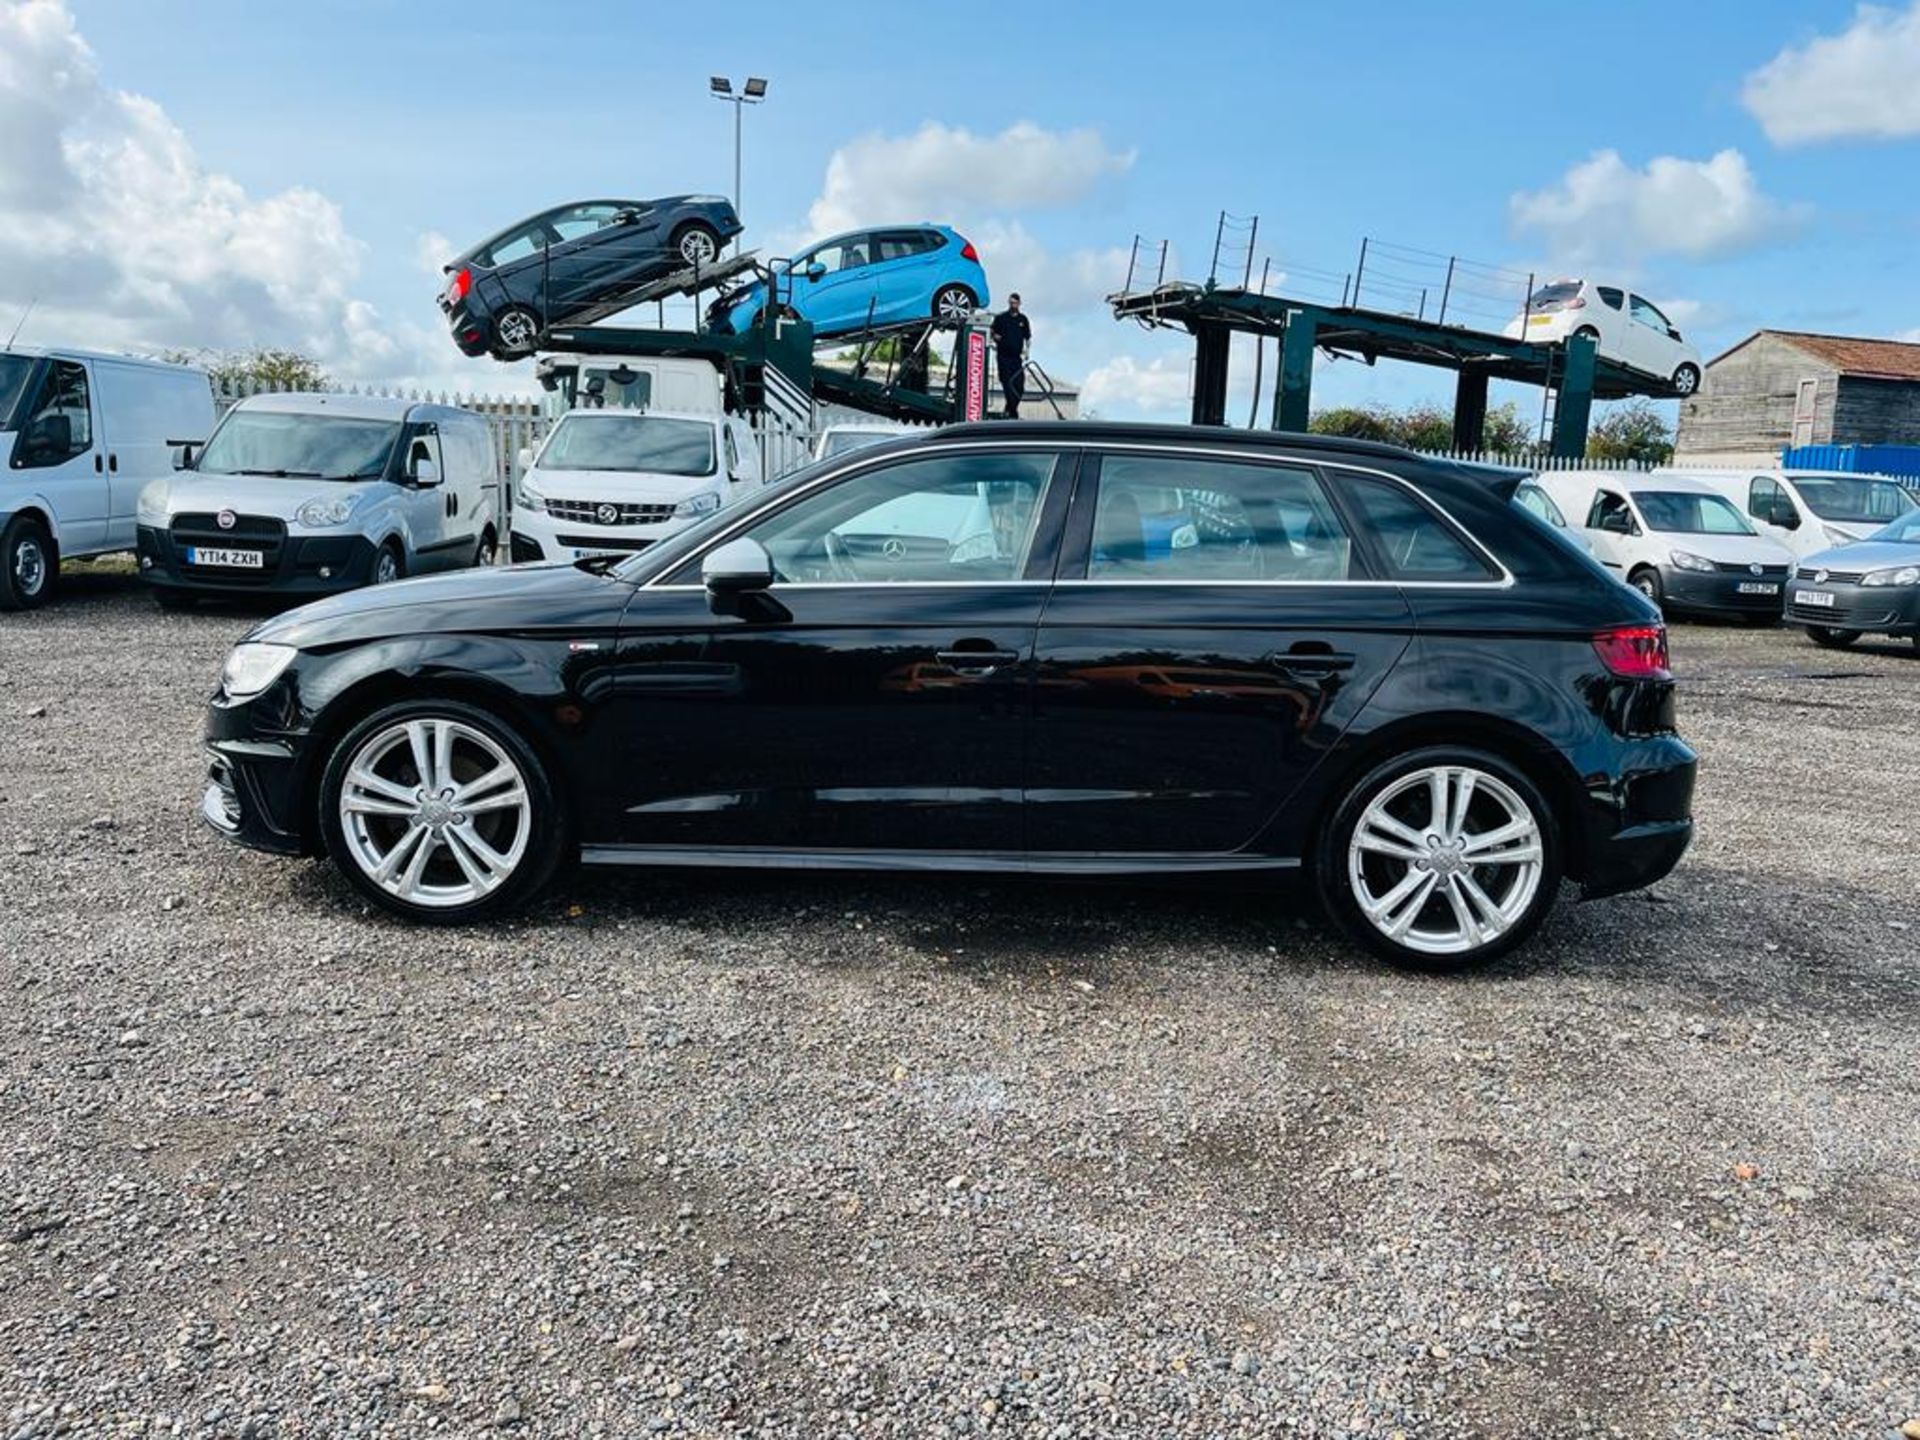 ** ON SALE ** Audi A3 S Line 105 TDI 1.6 2014 "14 Reg" Air Conditioning - Alloy Wheels - No Vat - Image 4 of 30